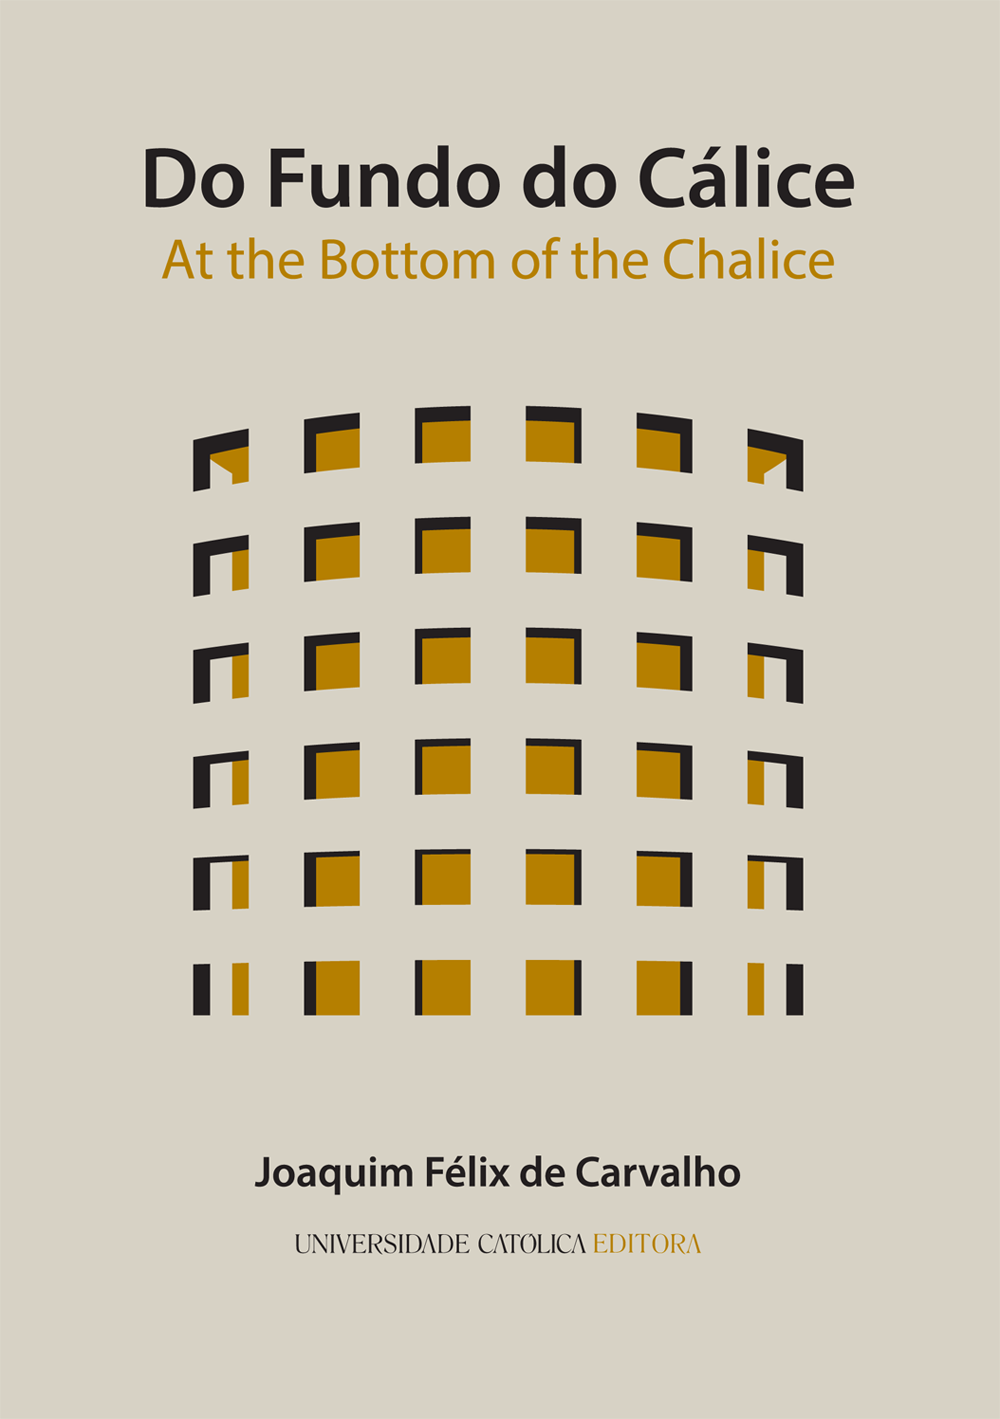 DO FUNDO DO CÁLICE - At the Bottom of the Chalice